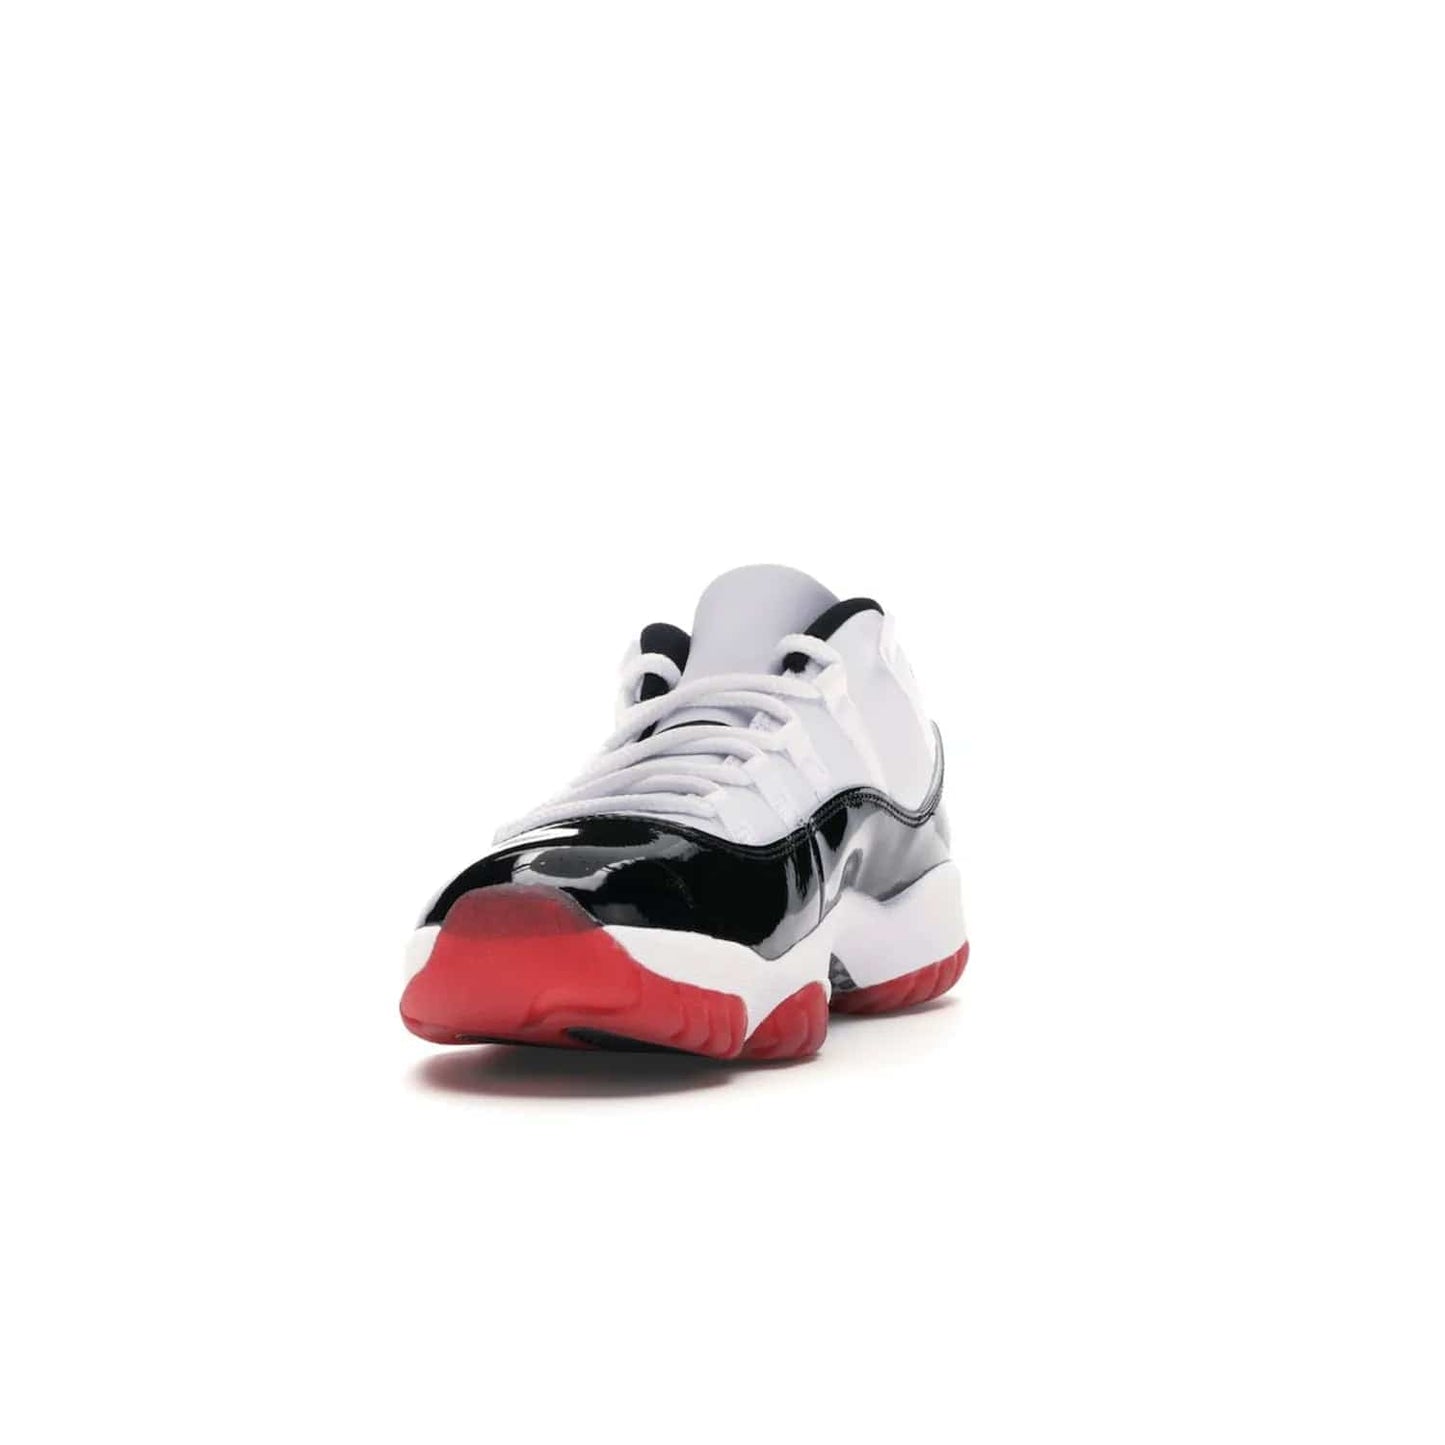 Jordan 11 Retro Low Concord Bred - Image 12 - Only at www.BallersClubKickz.com - Grab the classic Jordan 11 look with the Jordan 11 Retro Low Concord Bred. With white and black elements and the iconic red outsole of the Jordan 11 Bred, you won't miss a beat. Released in June 2020, the perfect complement to any outfit.